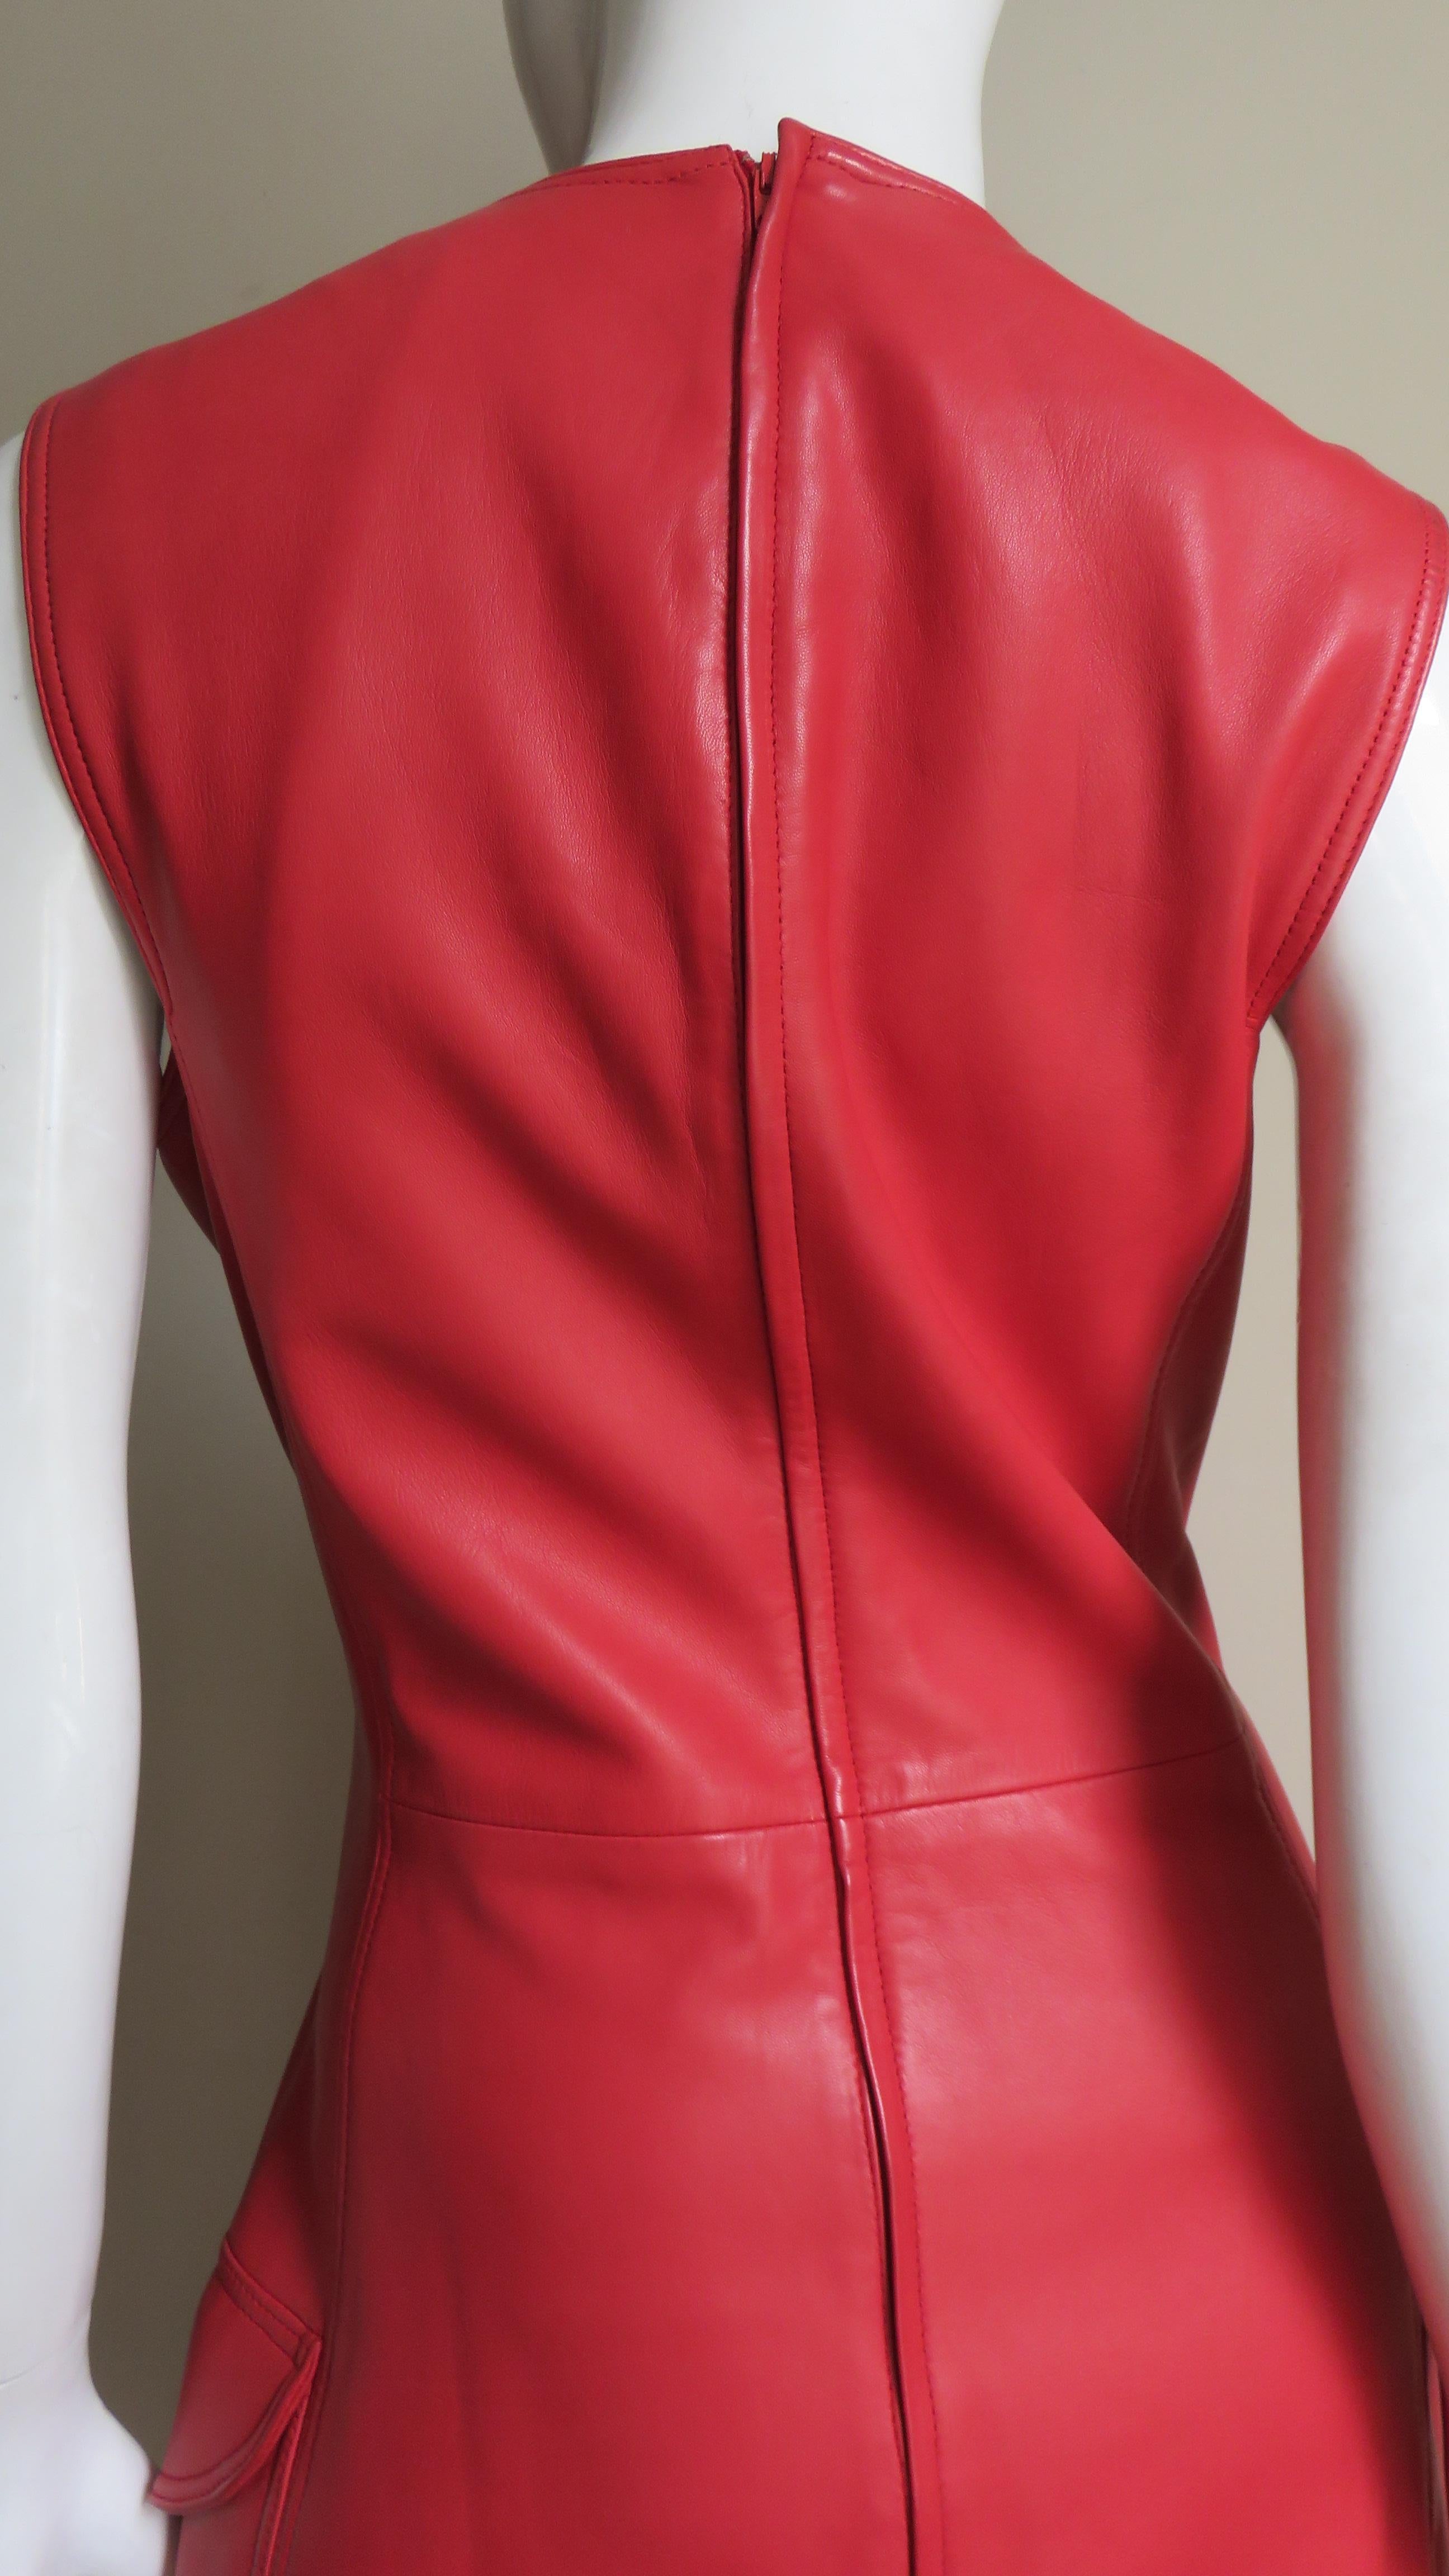 Gianni Versace New F/W 1996 Red Leather Dress For Sale 3